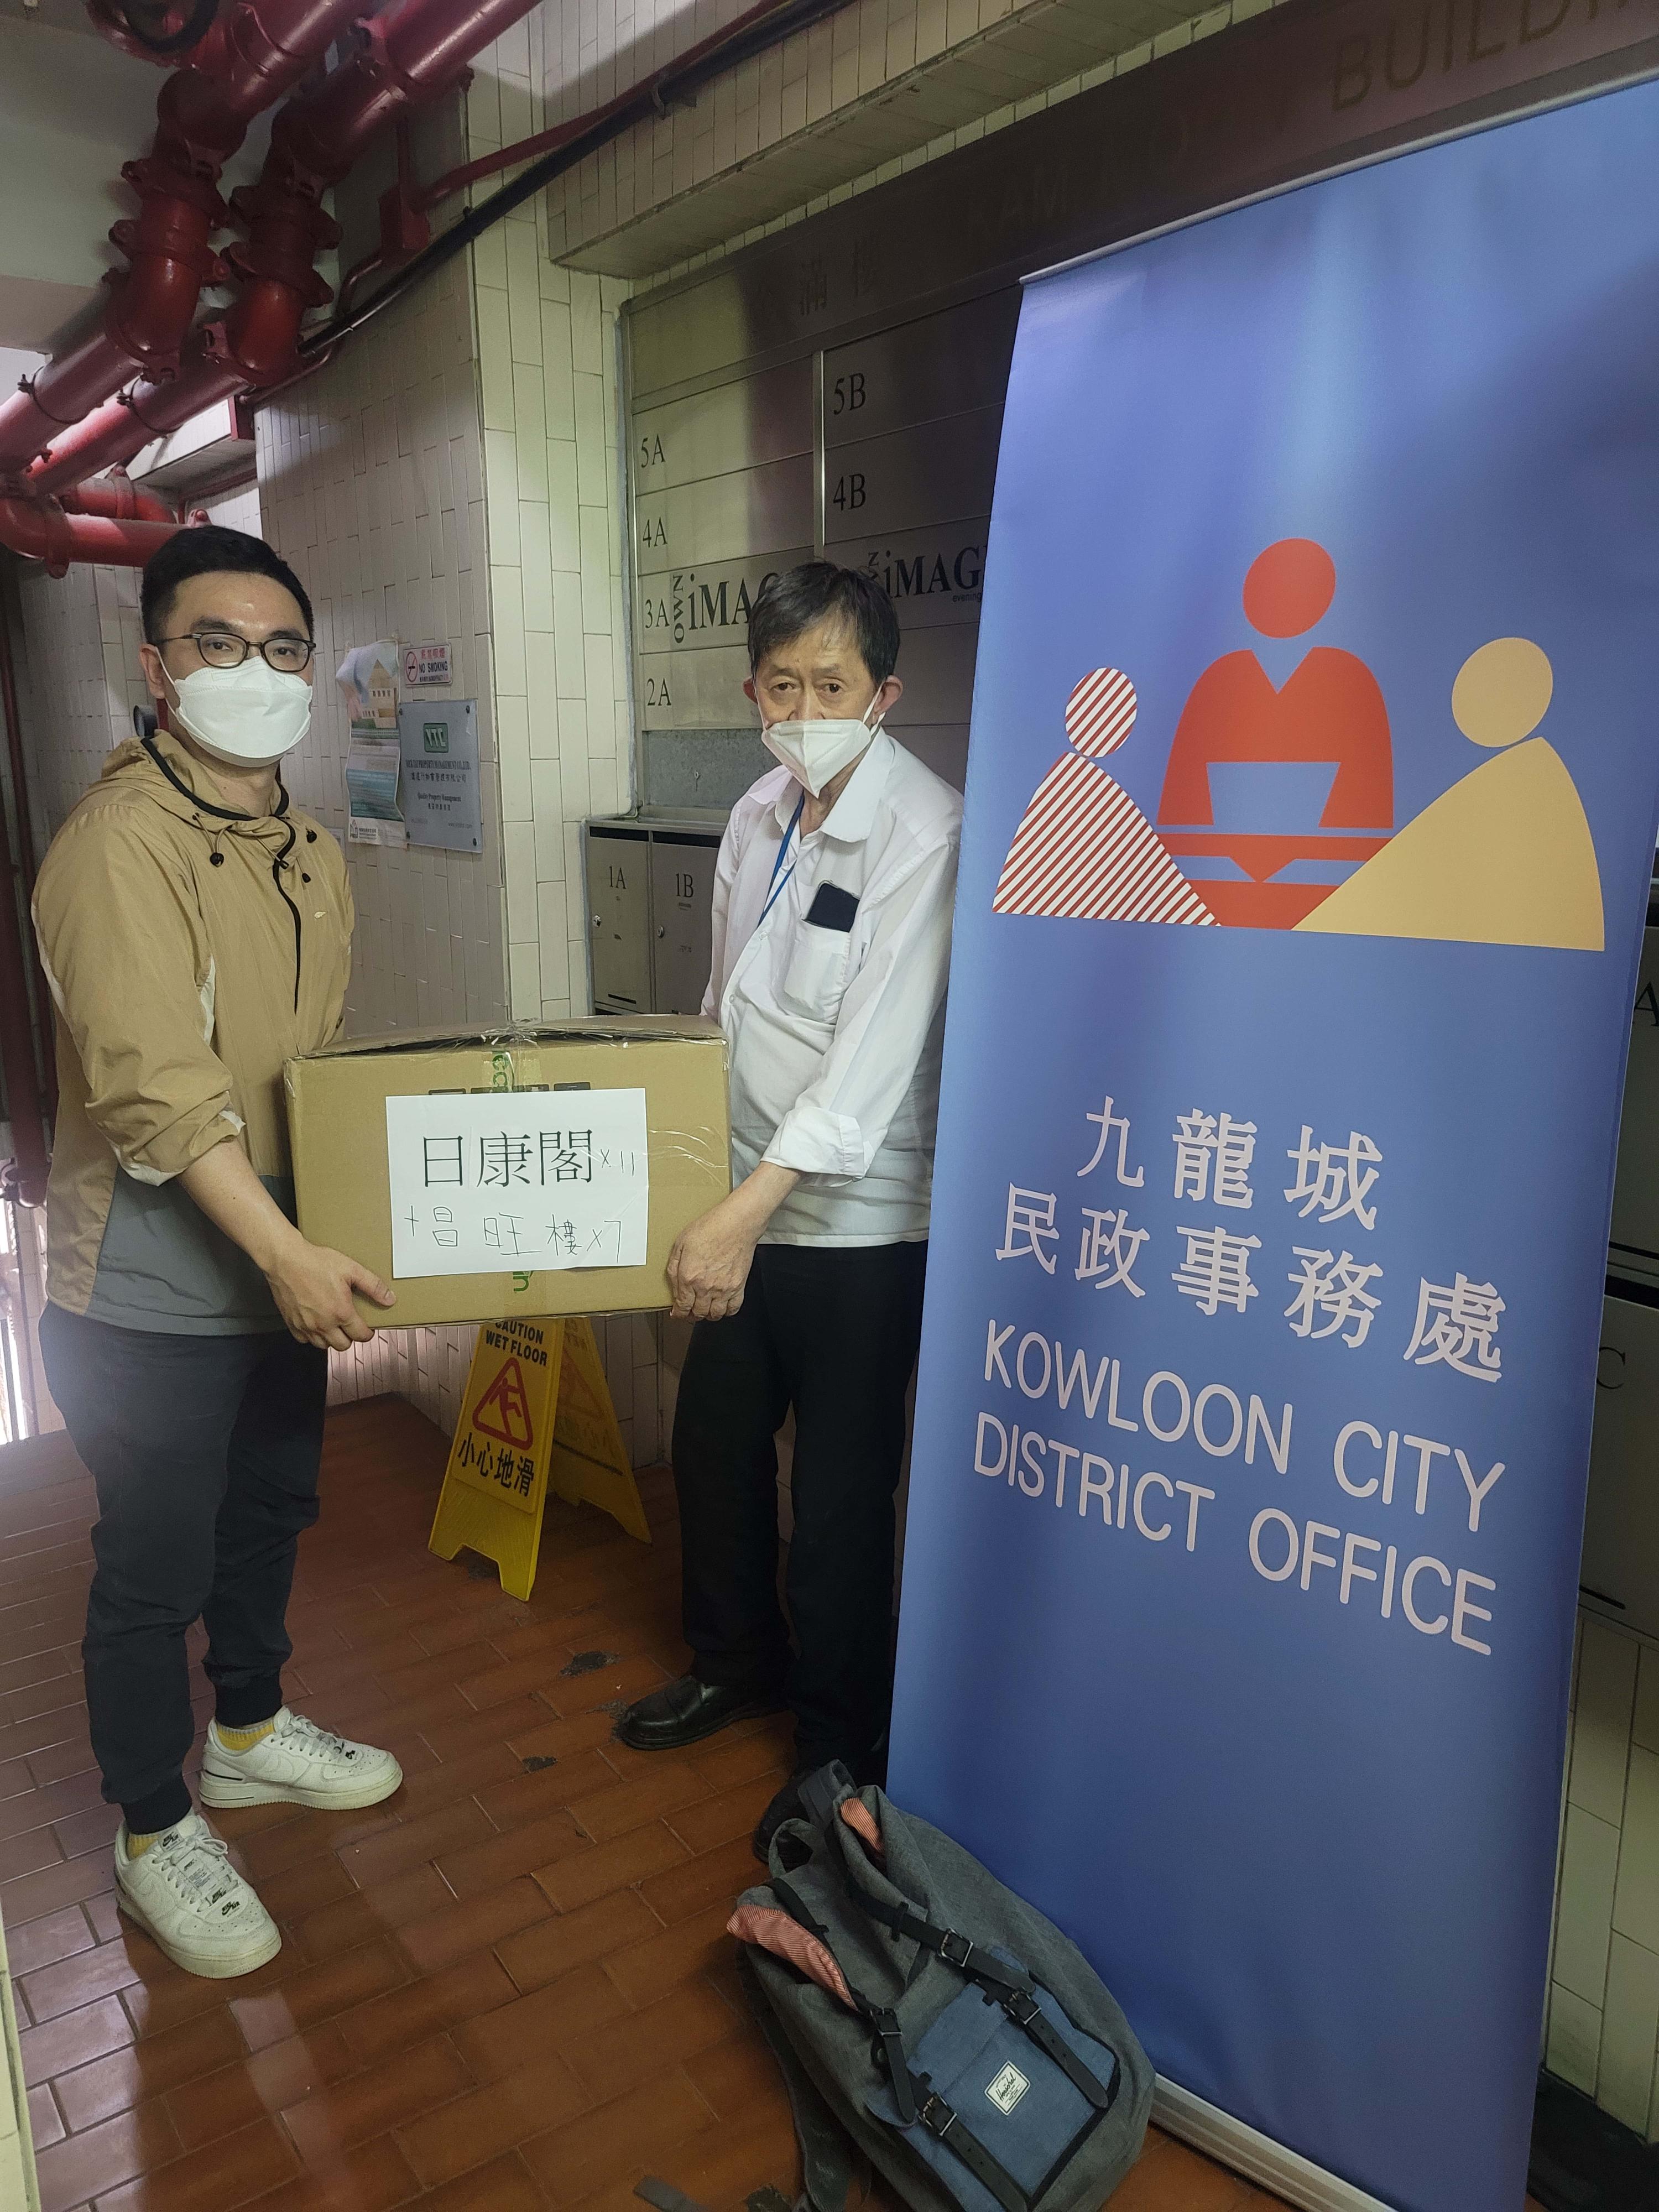 The Kowloon City District Office today (May 13) distributed COVID-19 rapid test kits to households, cleansing workers and property management staff living and working in Yat Hong Court for voluntary testing through the property management company and the district organisation.